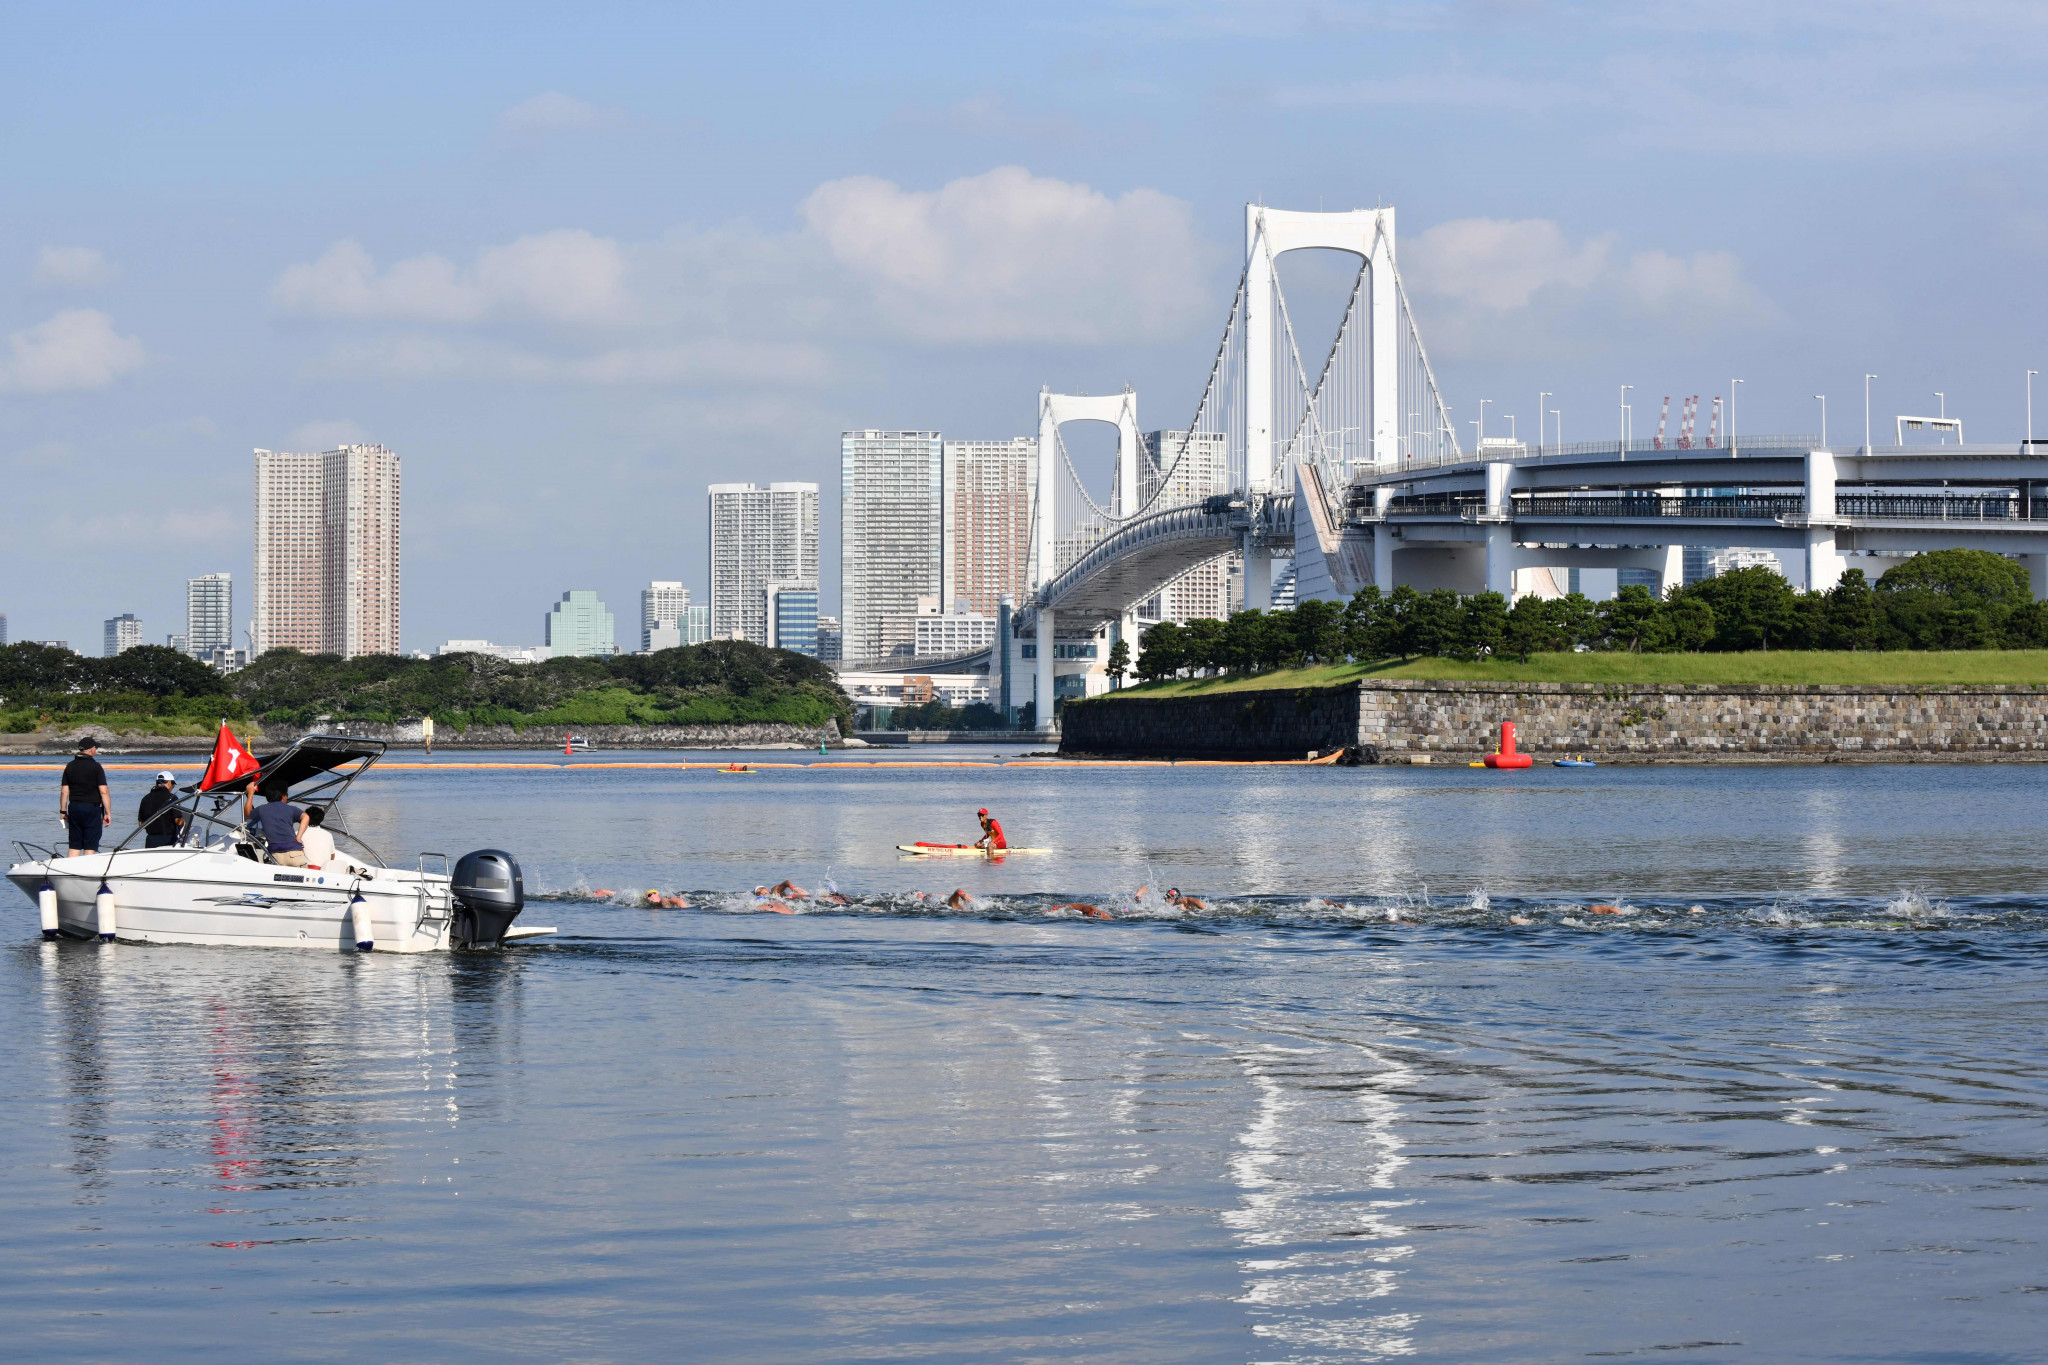 Tokyo 2020 has brought forward the start of the marathon swim events ©Getty Images